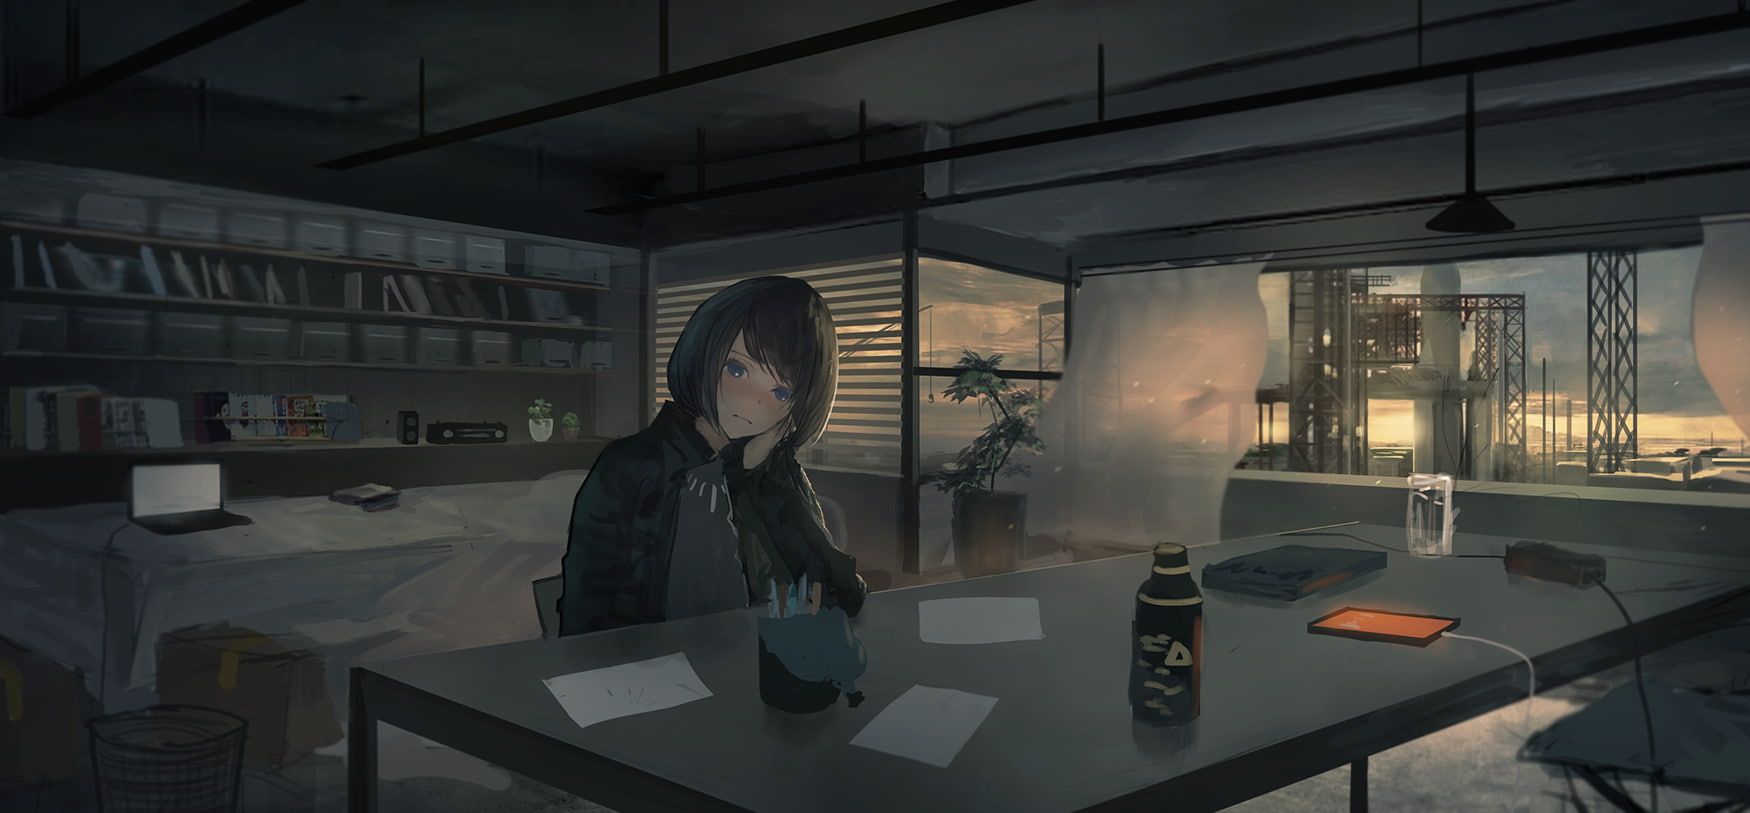 A woman sits at a desk in a darkened room. - Dark anime